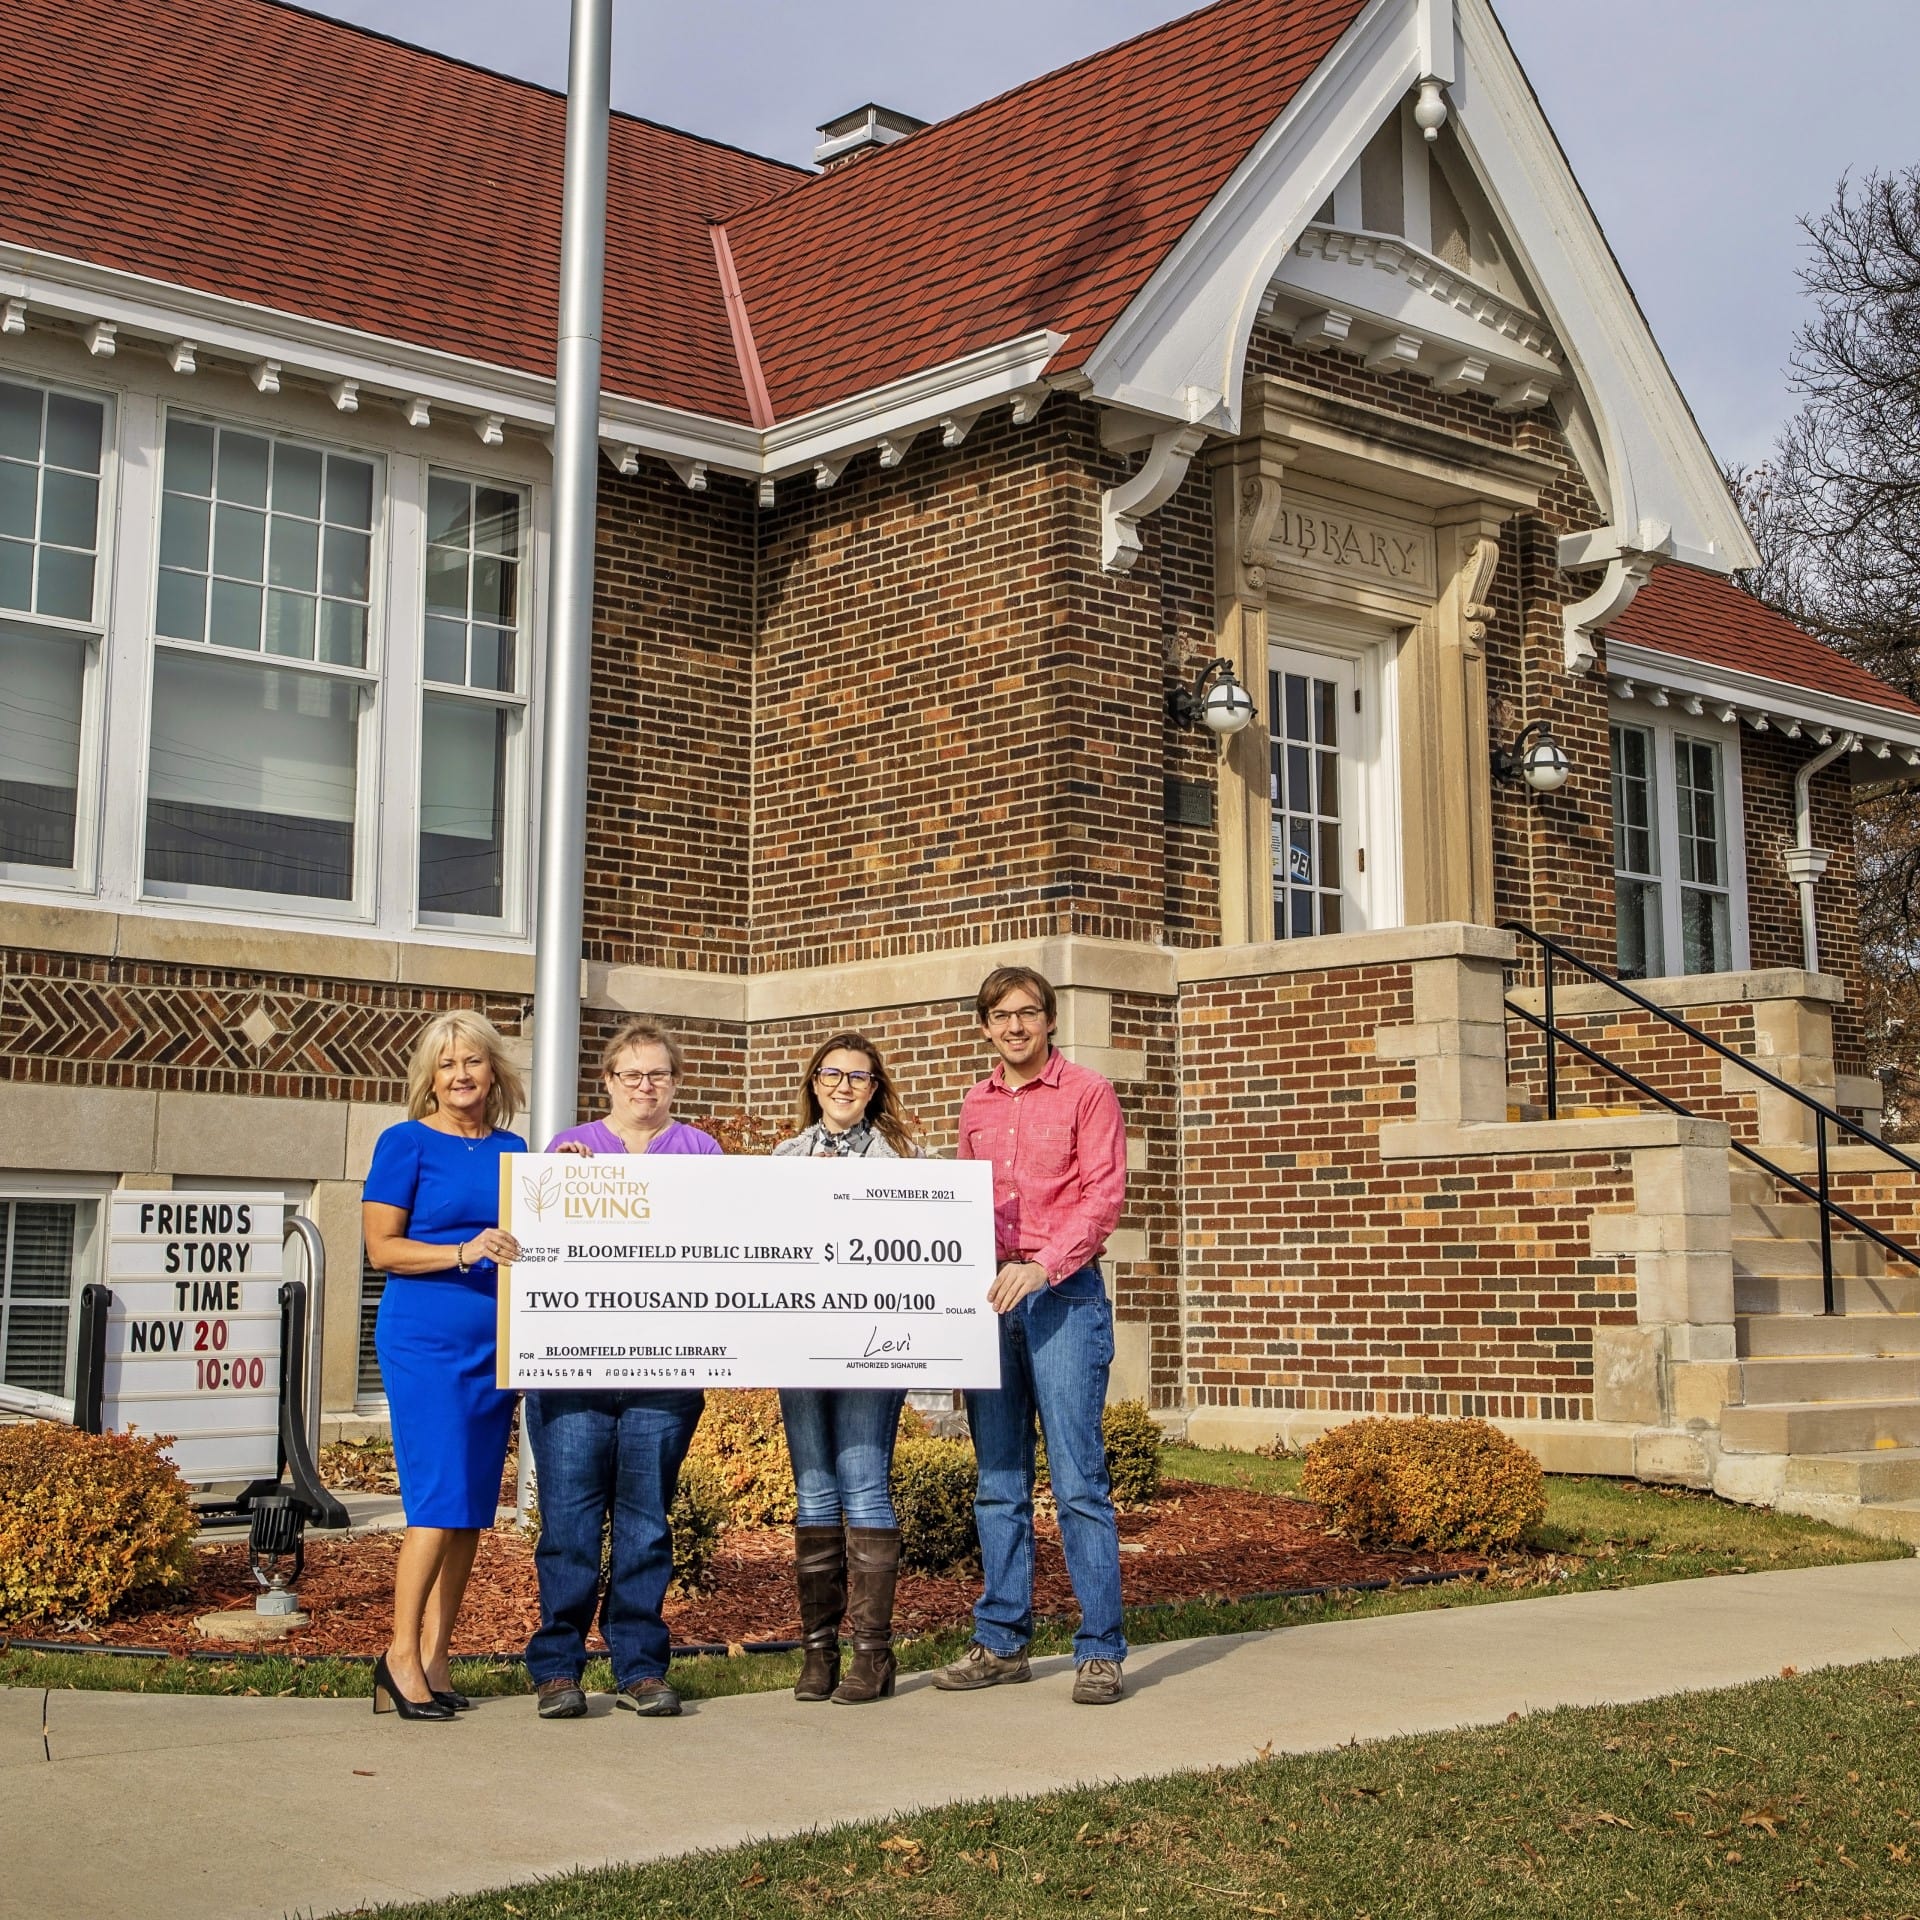 Dutch Country Living Makes Gift to Bloomfield Public Library